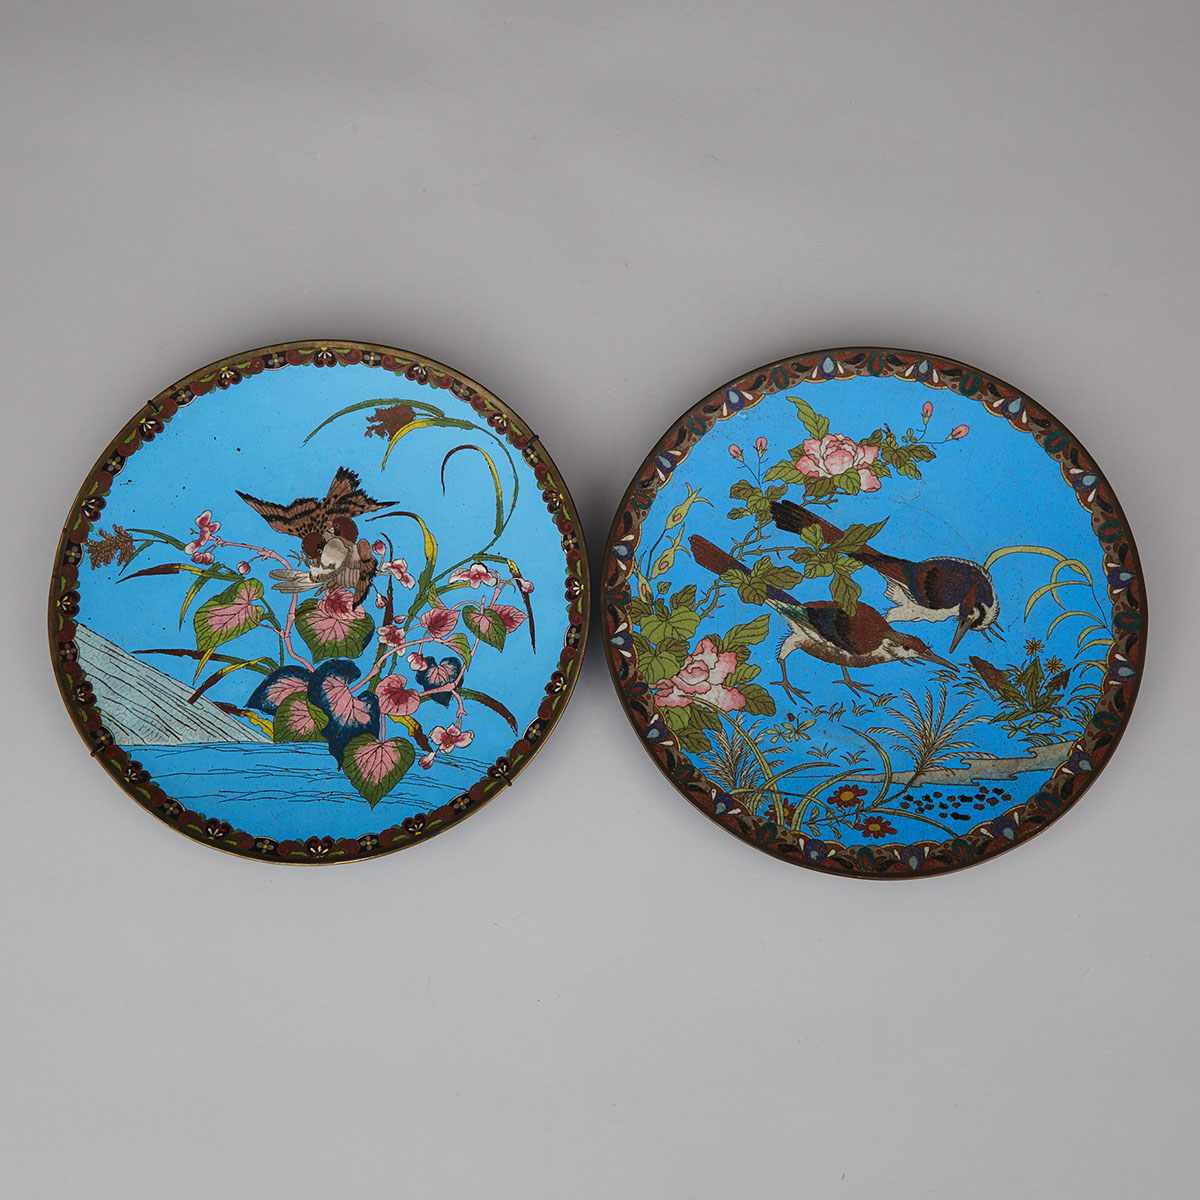 Two Japanese Avian Cloisonné Dishes, 19th/early 20th century